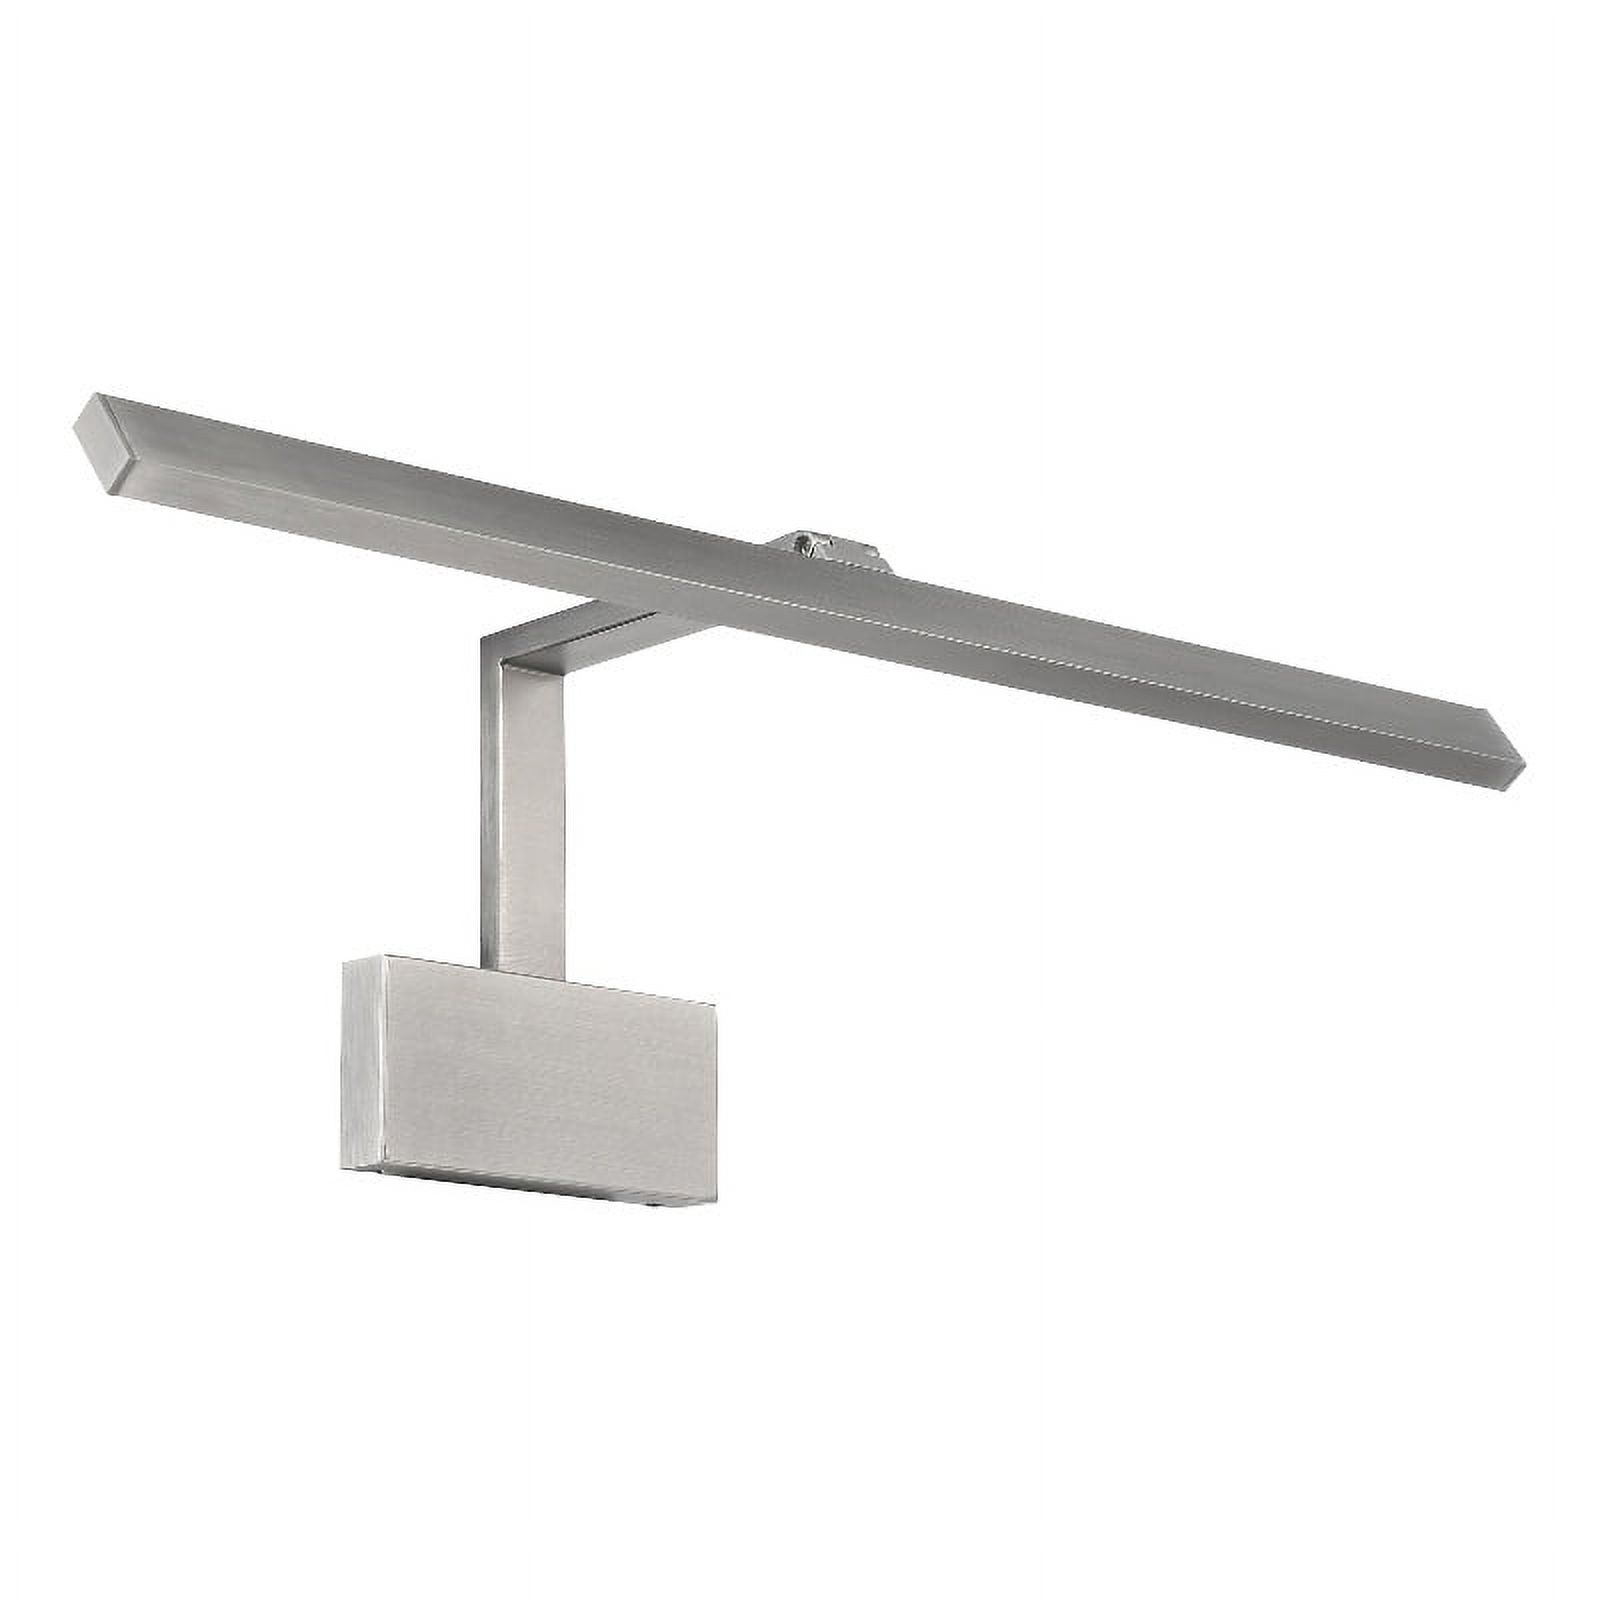 WAC Lighting Uptown 25" LED Adjustable Aluminum Picture Light in Brushed Nickel - image 1 of 5